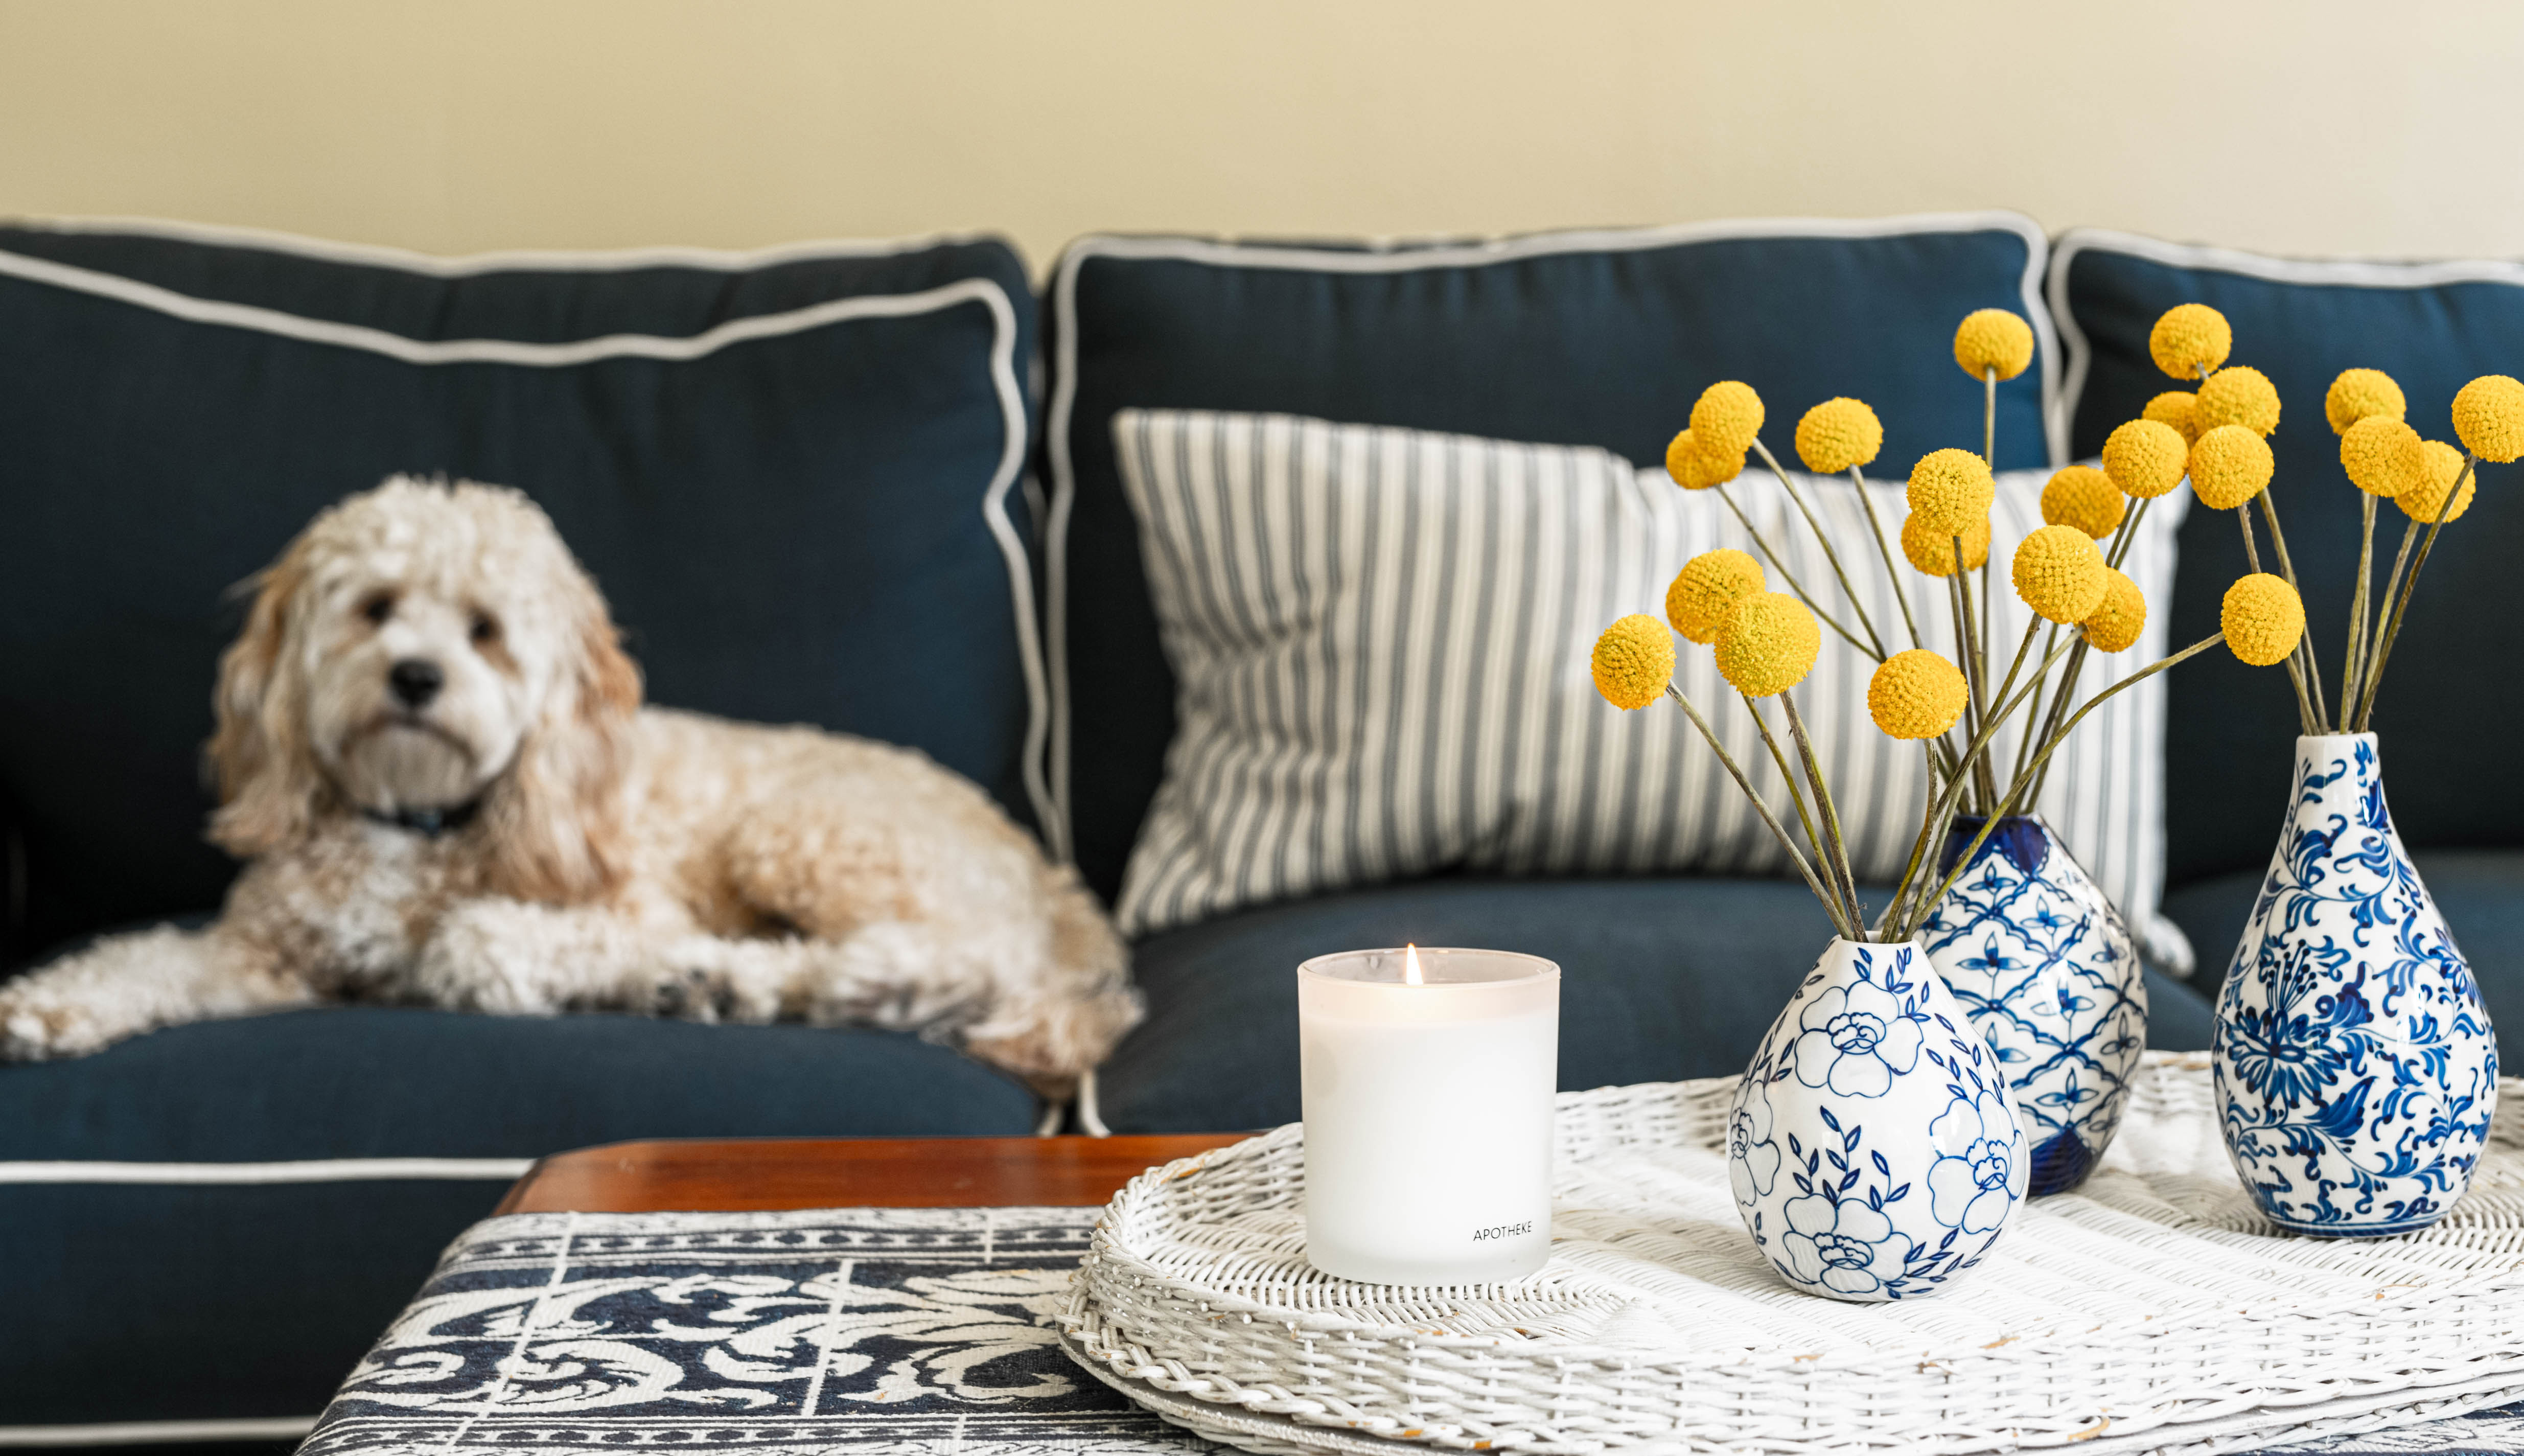 Dog sitting on a couch behind vases of dried flowers